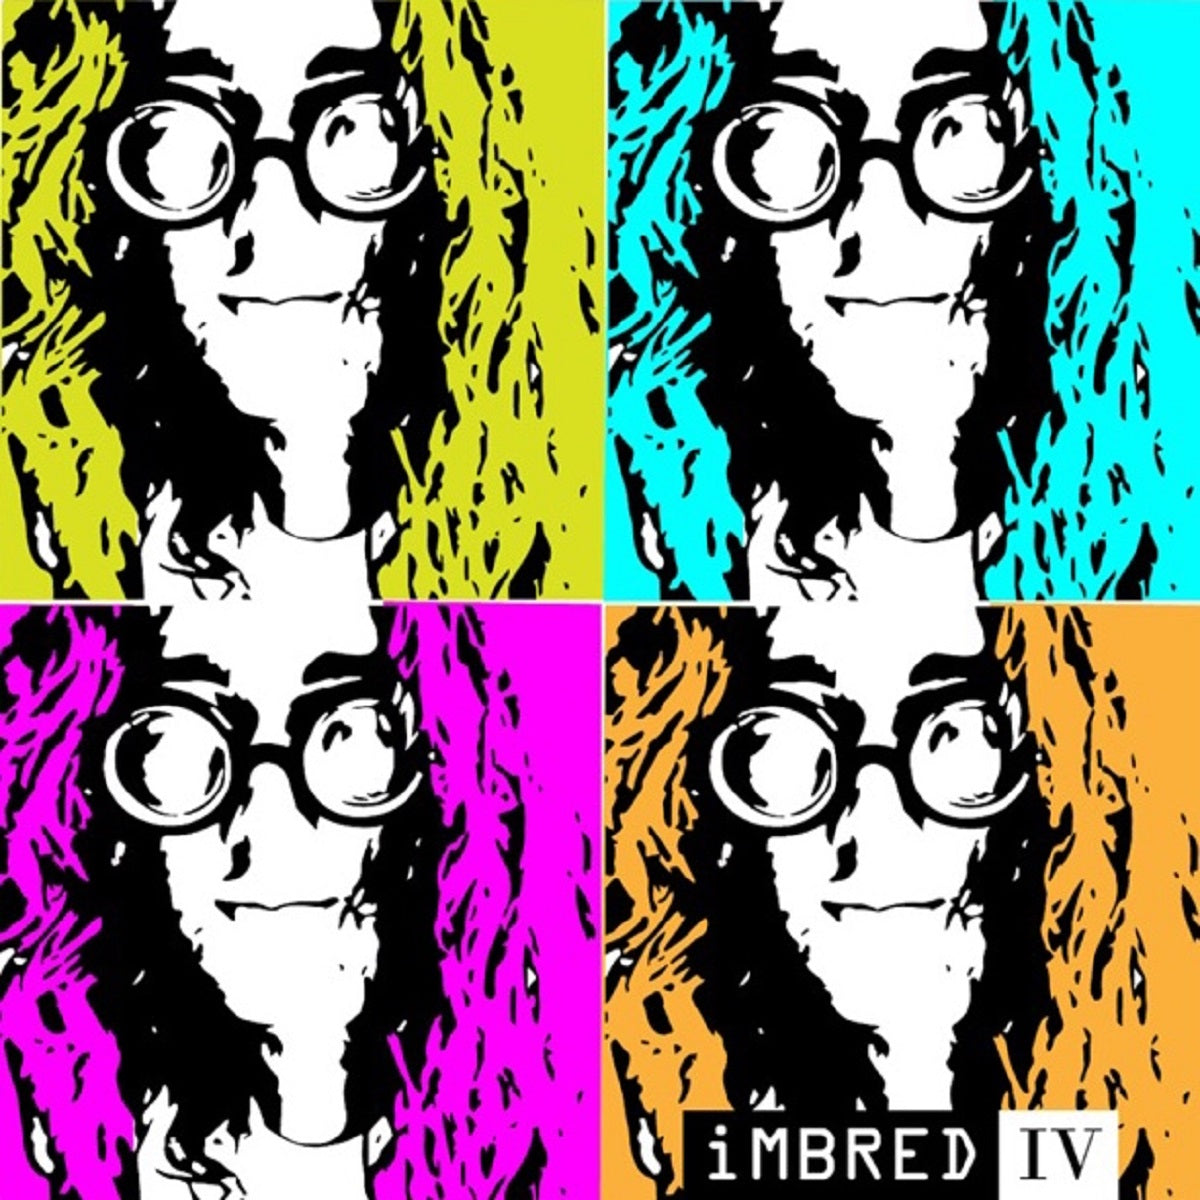 Imbred – IV (Remastered)